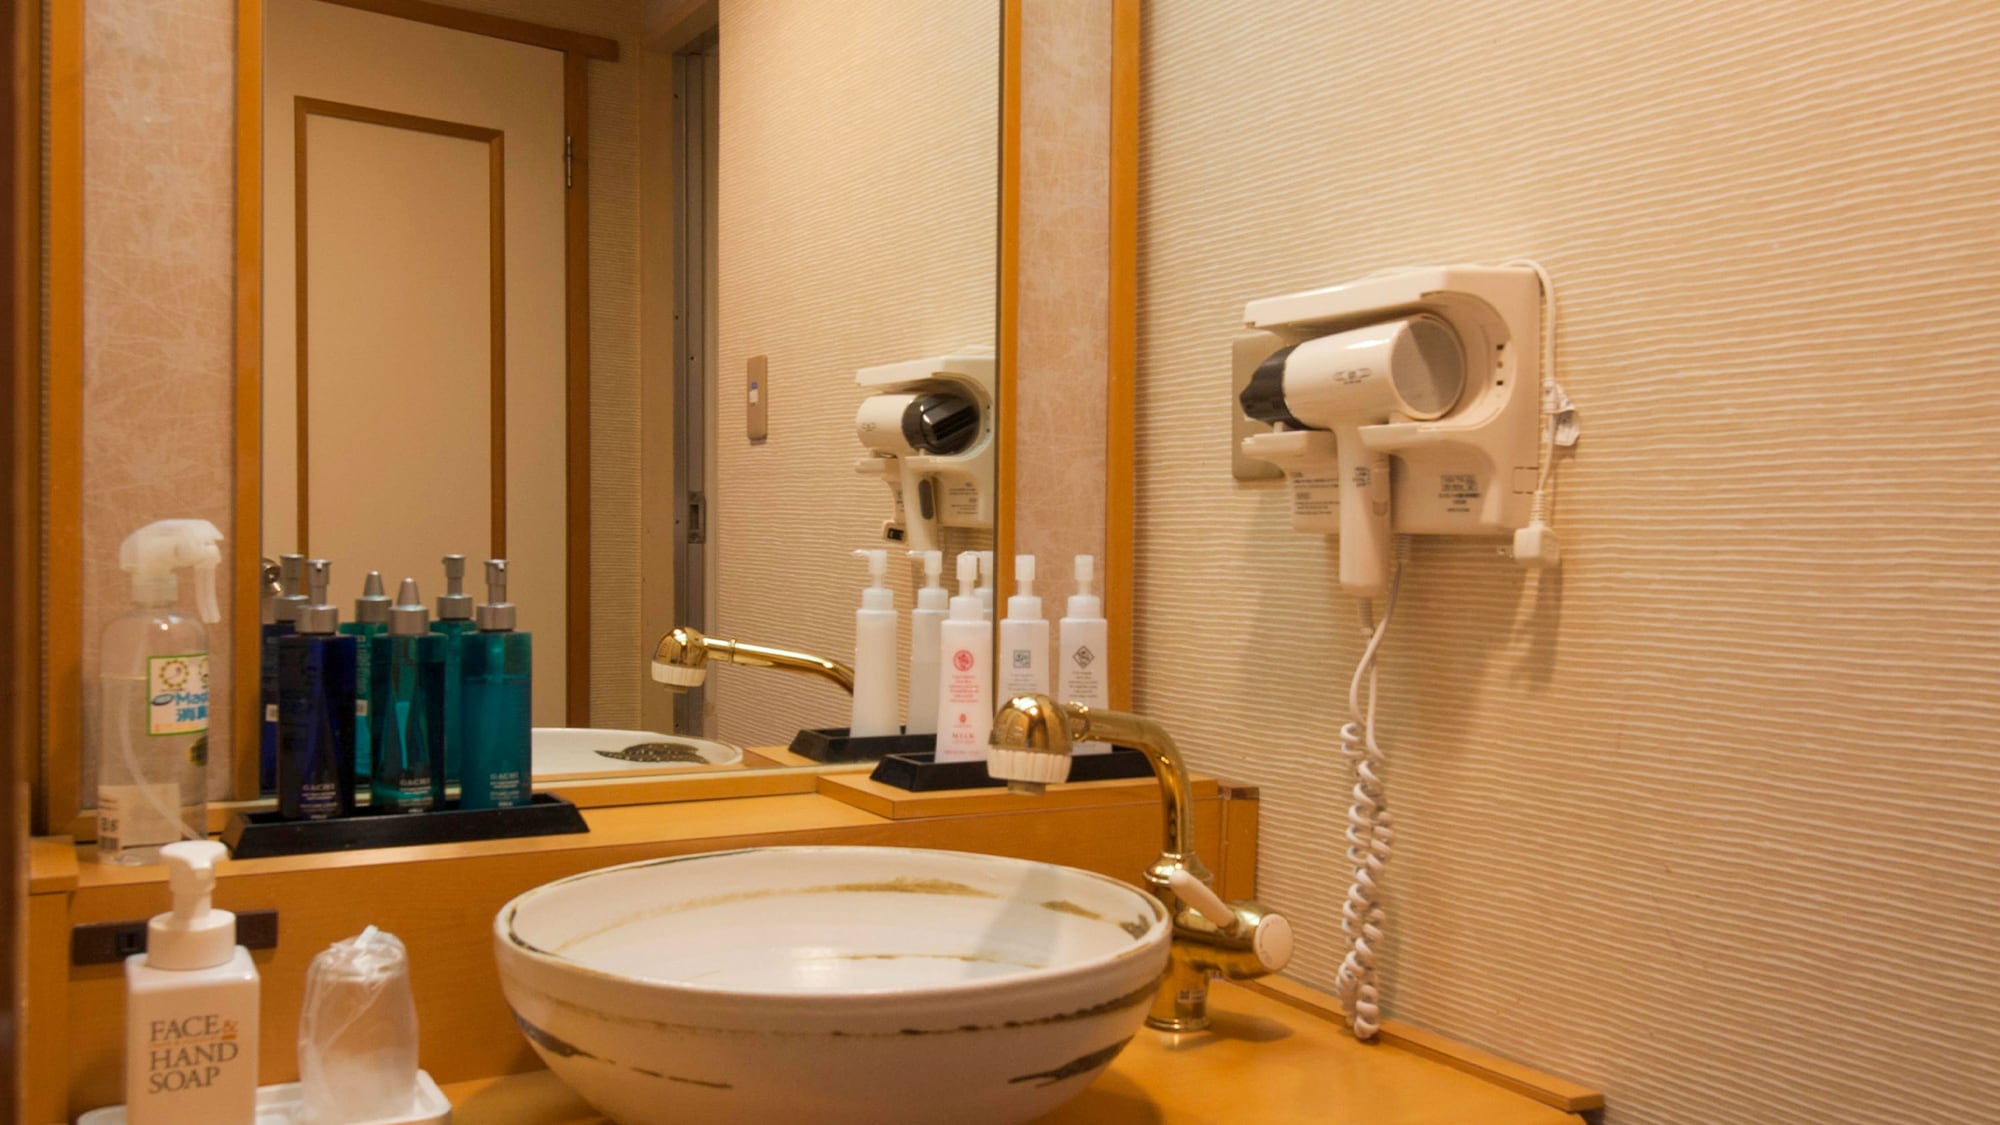 ■Standard guest room｜Each guest room is fully stocked with toiletries and cosmetics for men and women